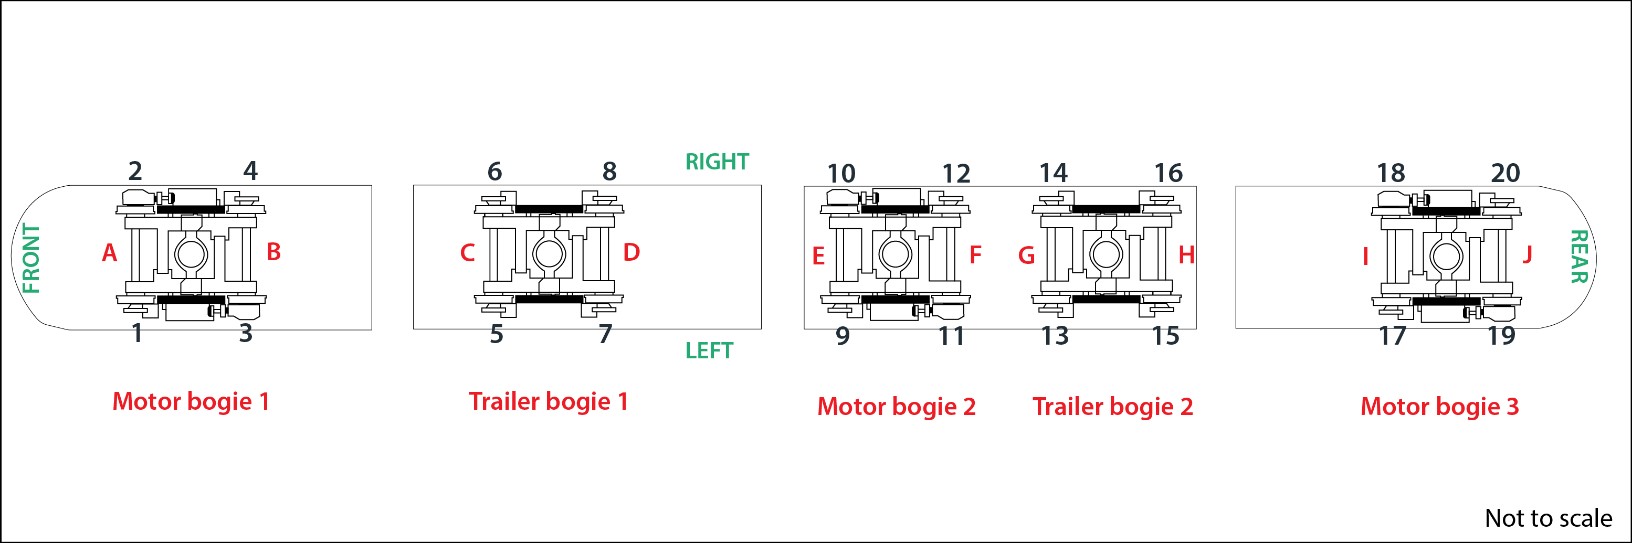 Schematic of an LRV showing bogies, axle locations A–J and wheel positions 1–20 (Source: TSB)